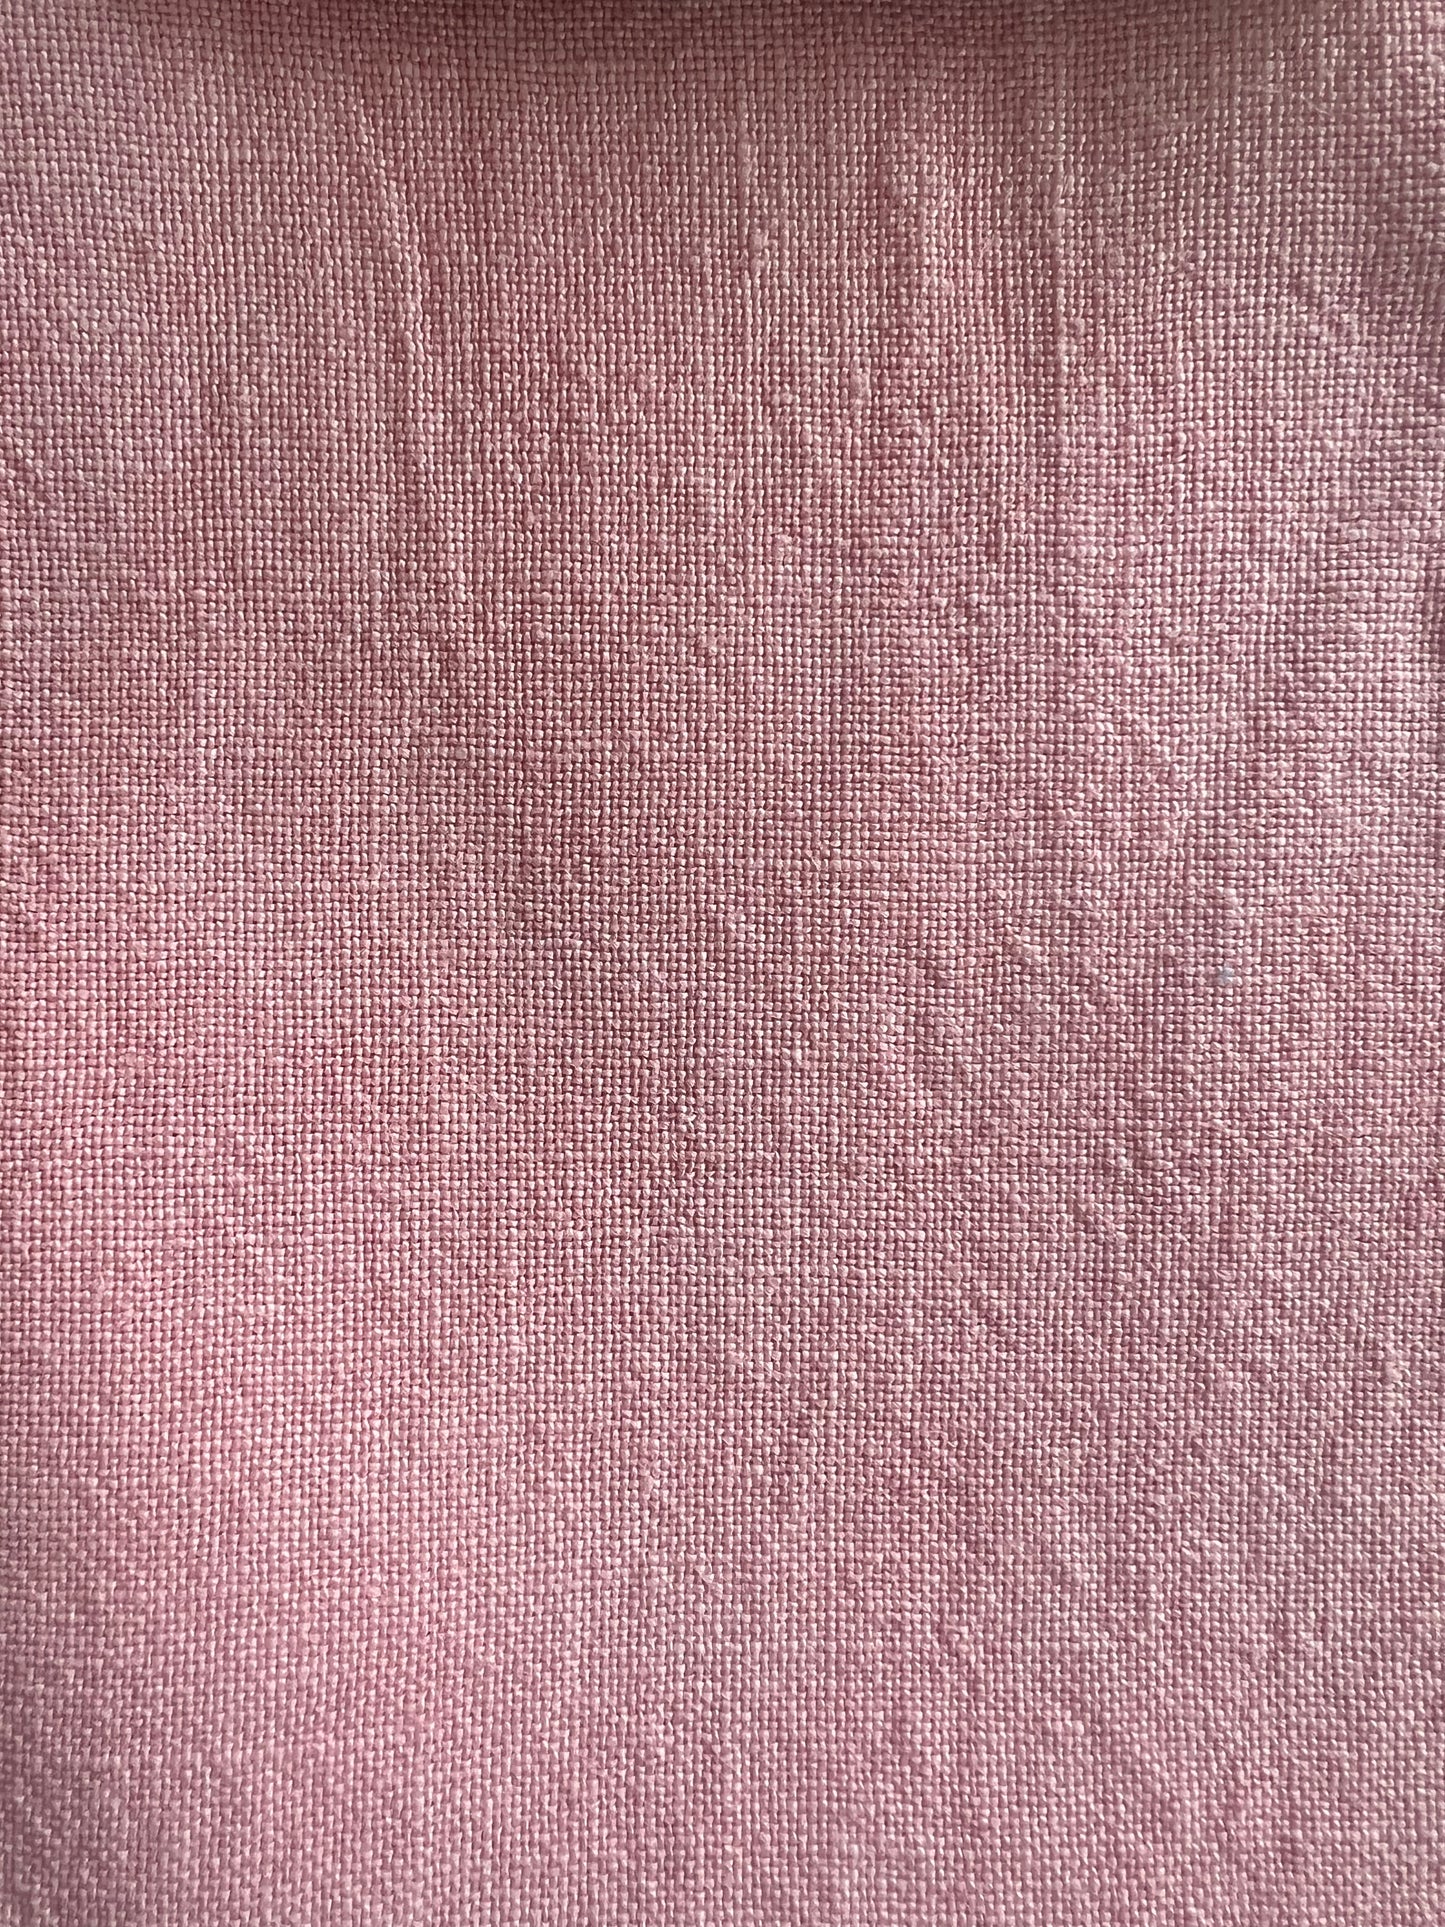 32 Count Linen 'Pink Lupin' Hand Dyed Cross Stitch Fabric